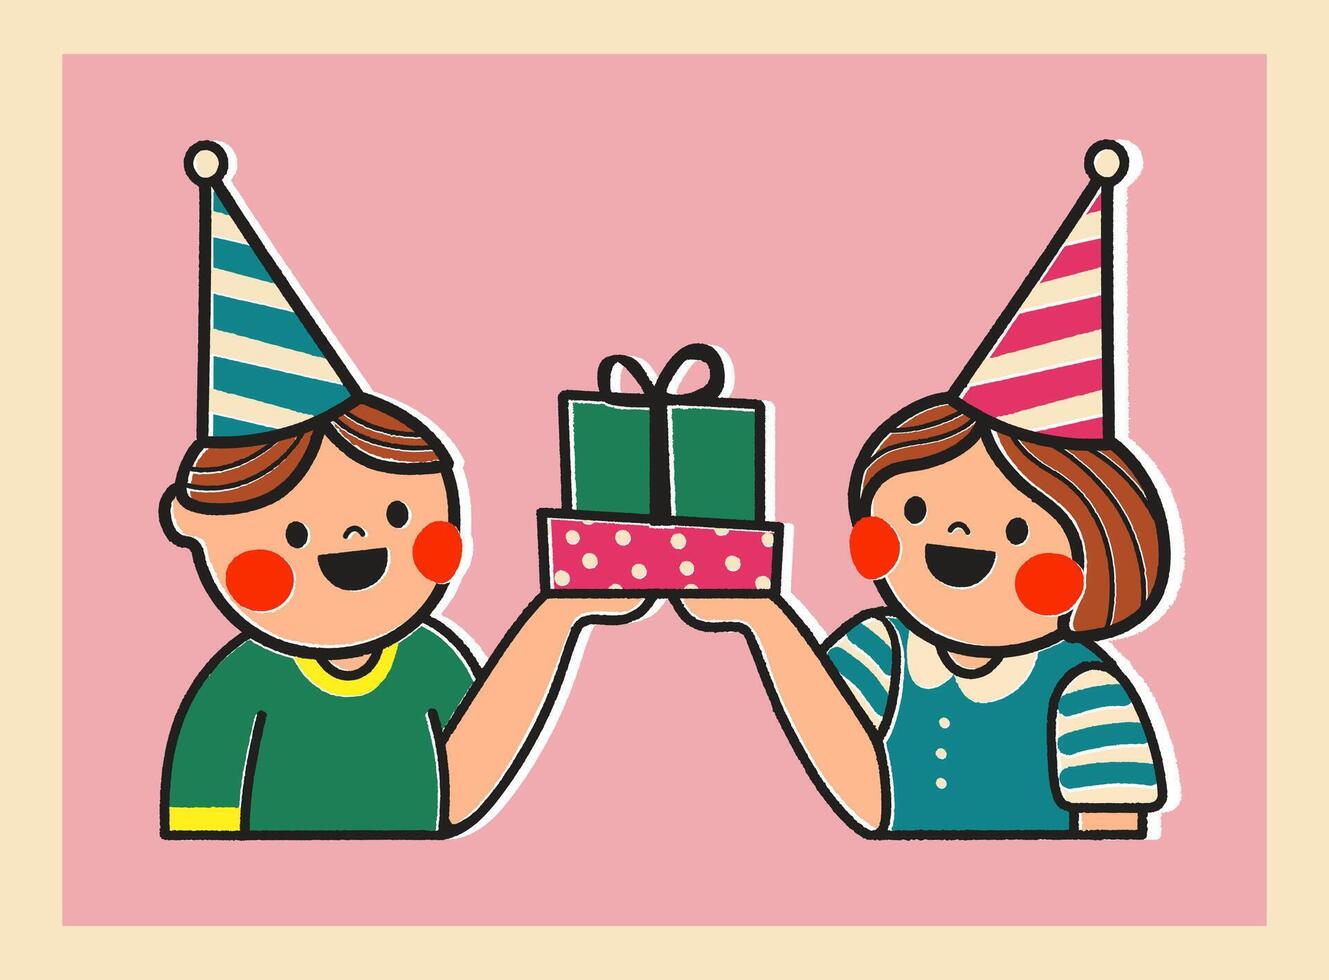 Birthday card with cartoon girl and boy holding a gift box illustration on pink background. Sticker style greeting card in retro style. Cute postcard for child or design for your brand. vector